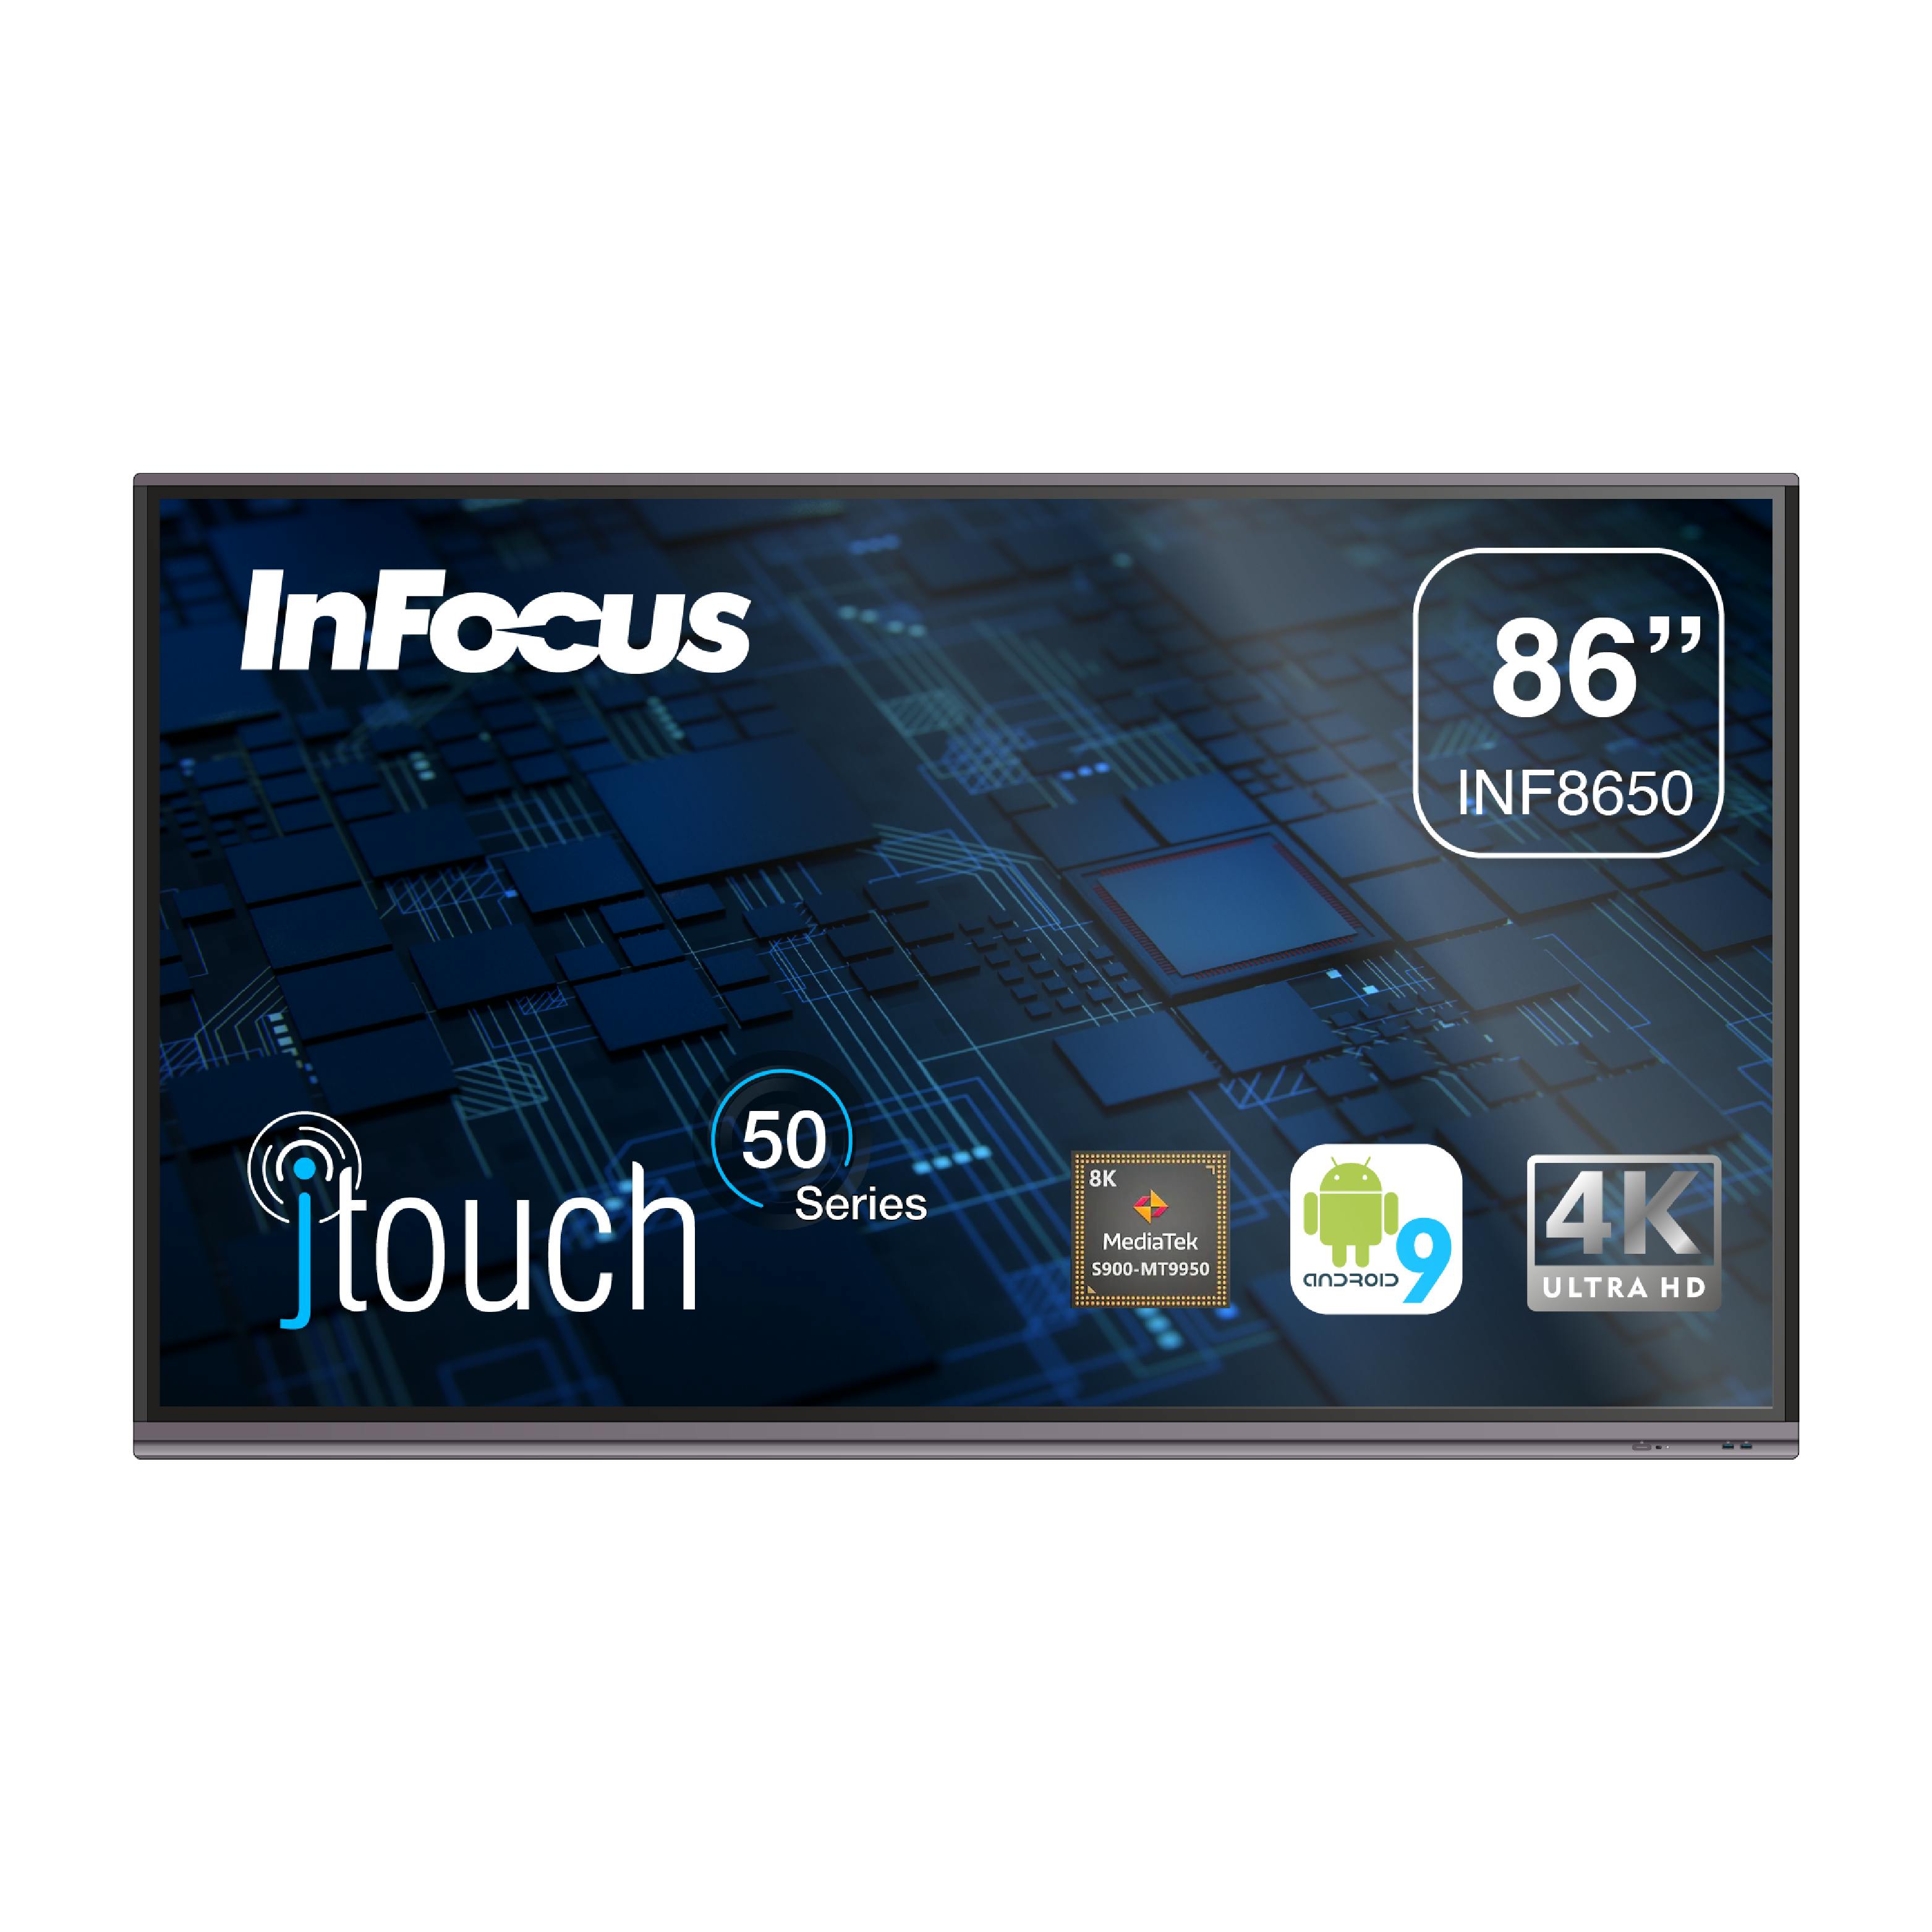 https://infocus.imgix.net/2022/04/JTouch-50-Series_INF8650_F_90-01.png?auto=compress%2Cformat&ixlib=php-3.3.0